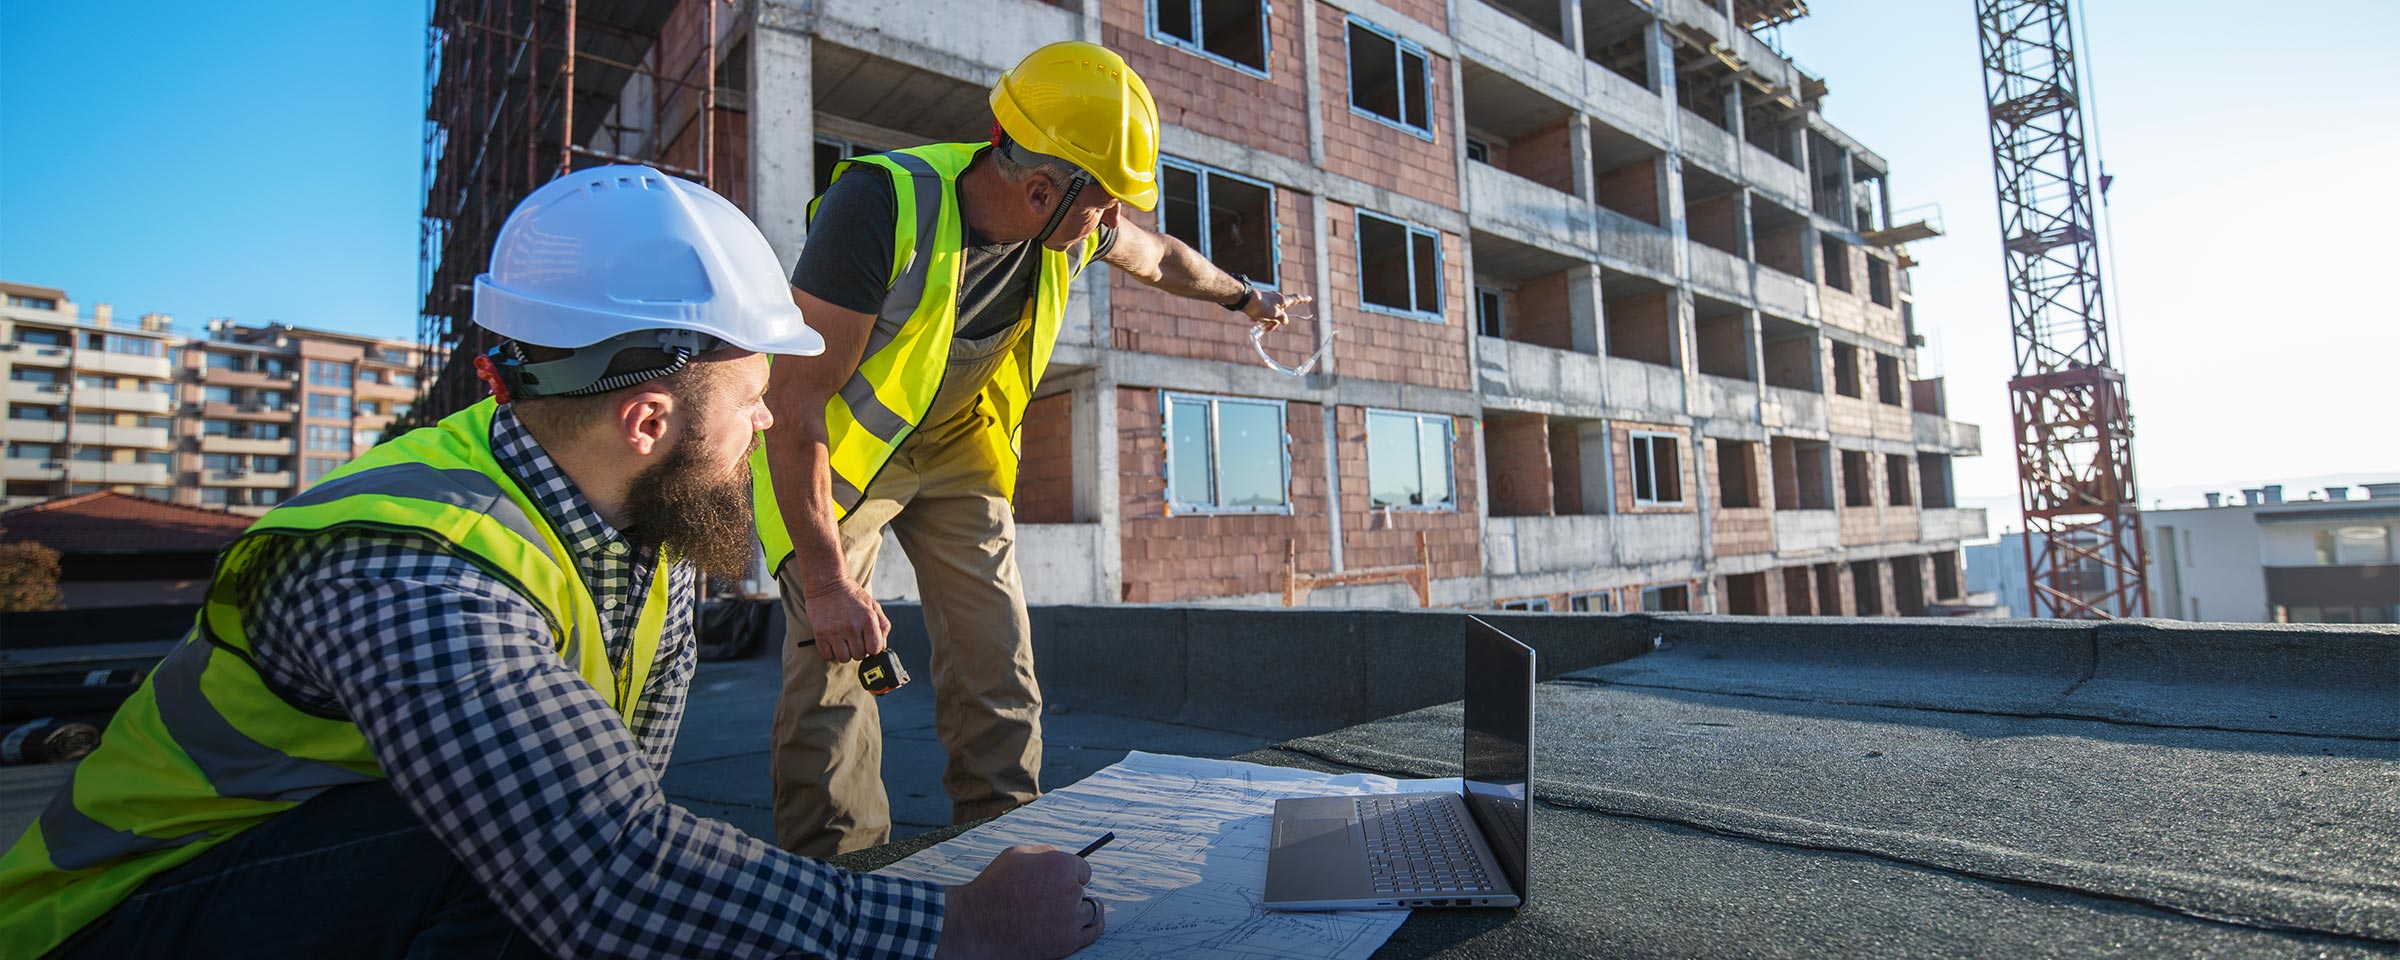 Two construction workers looking at blueprints and a laptop while on a construction site